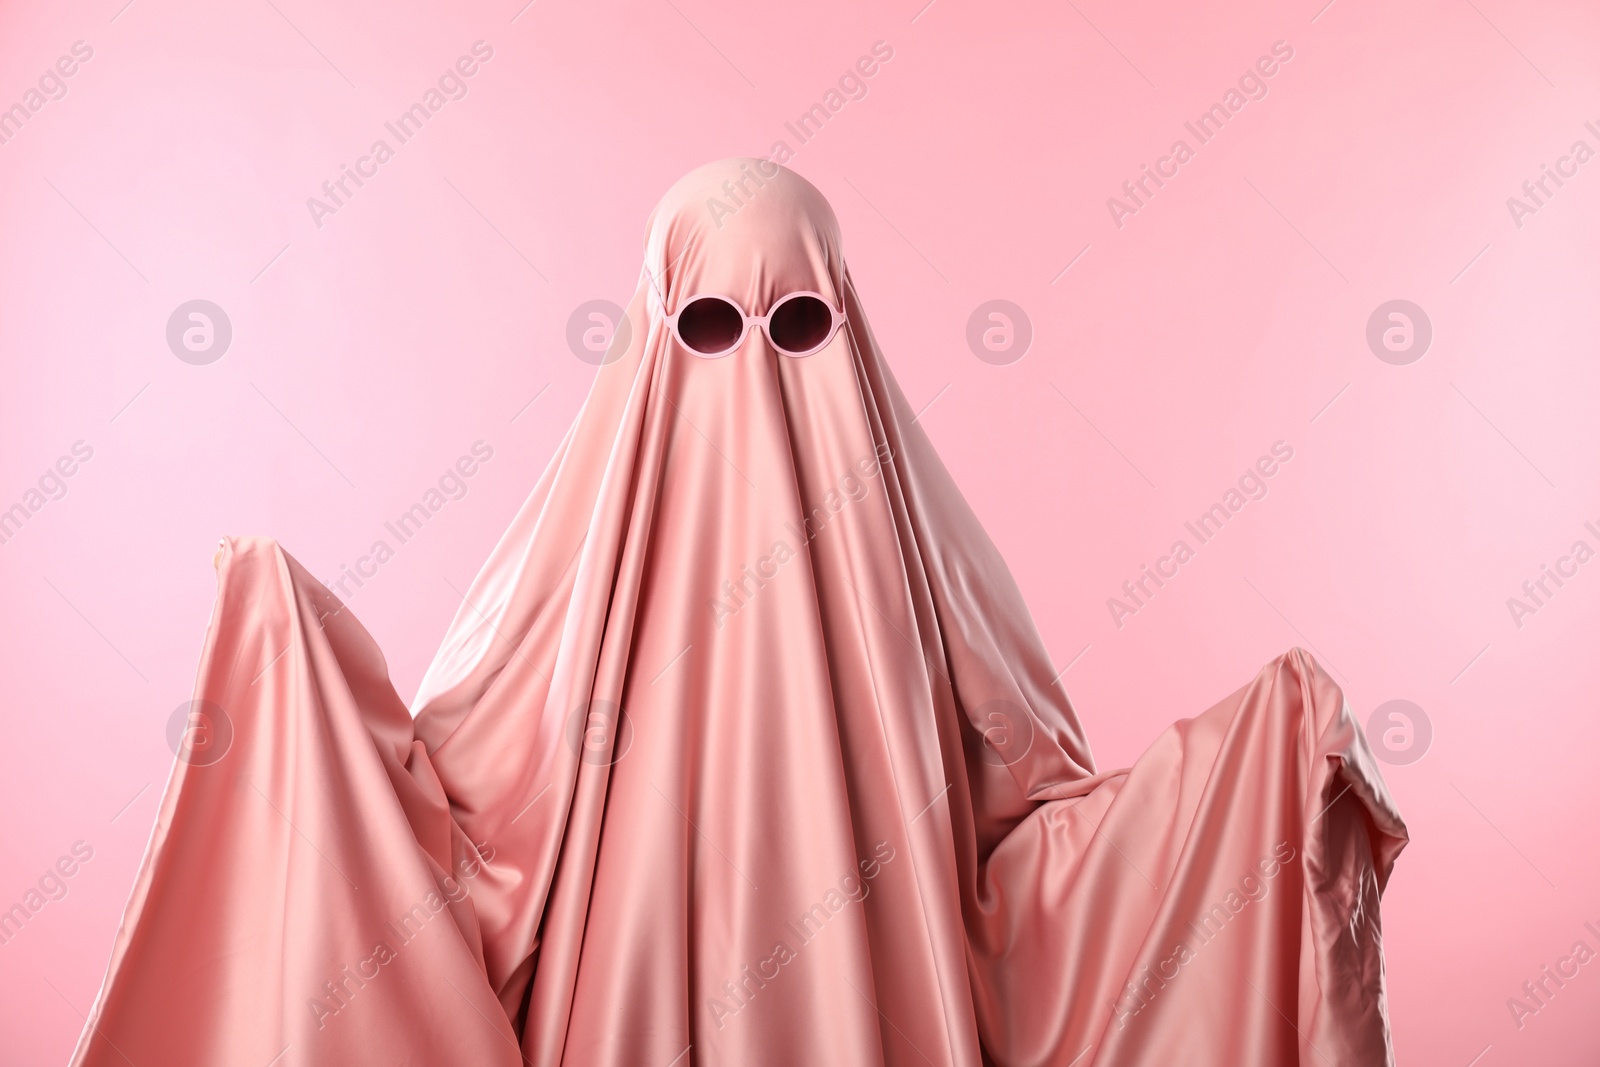 Photo of Glamorous ghost. Woman in sheet with sunglasses on pink background